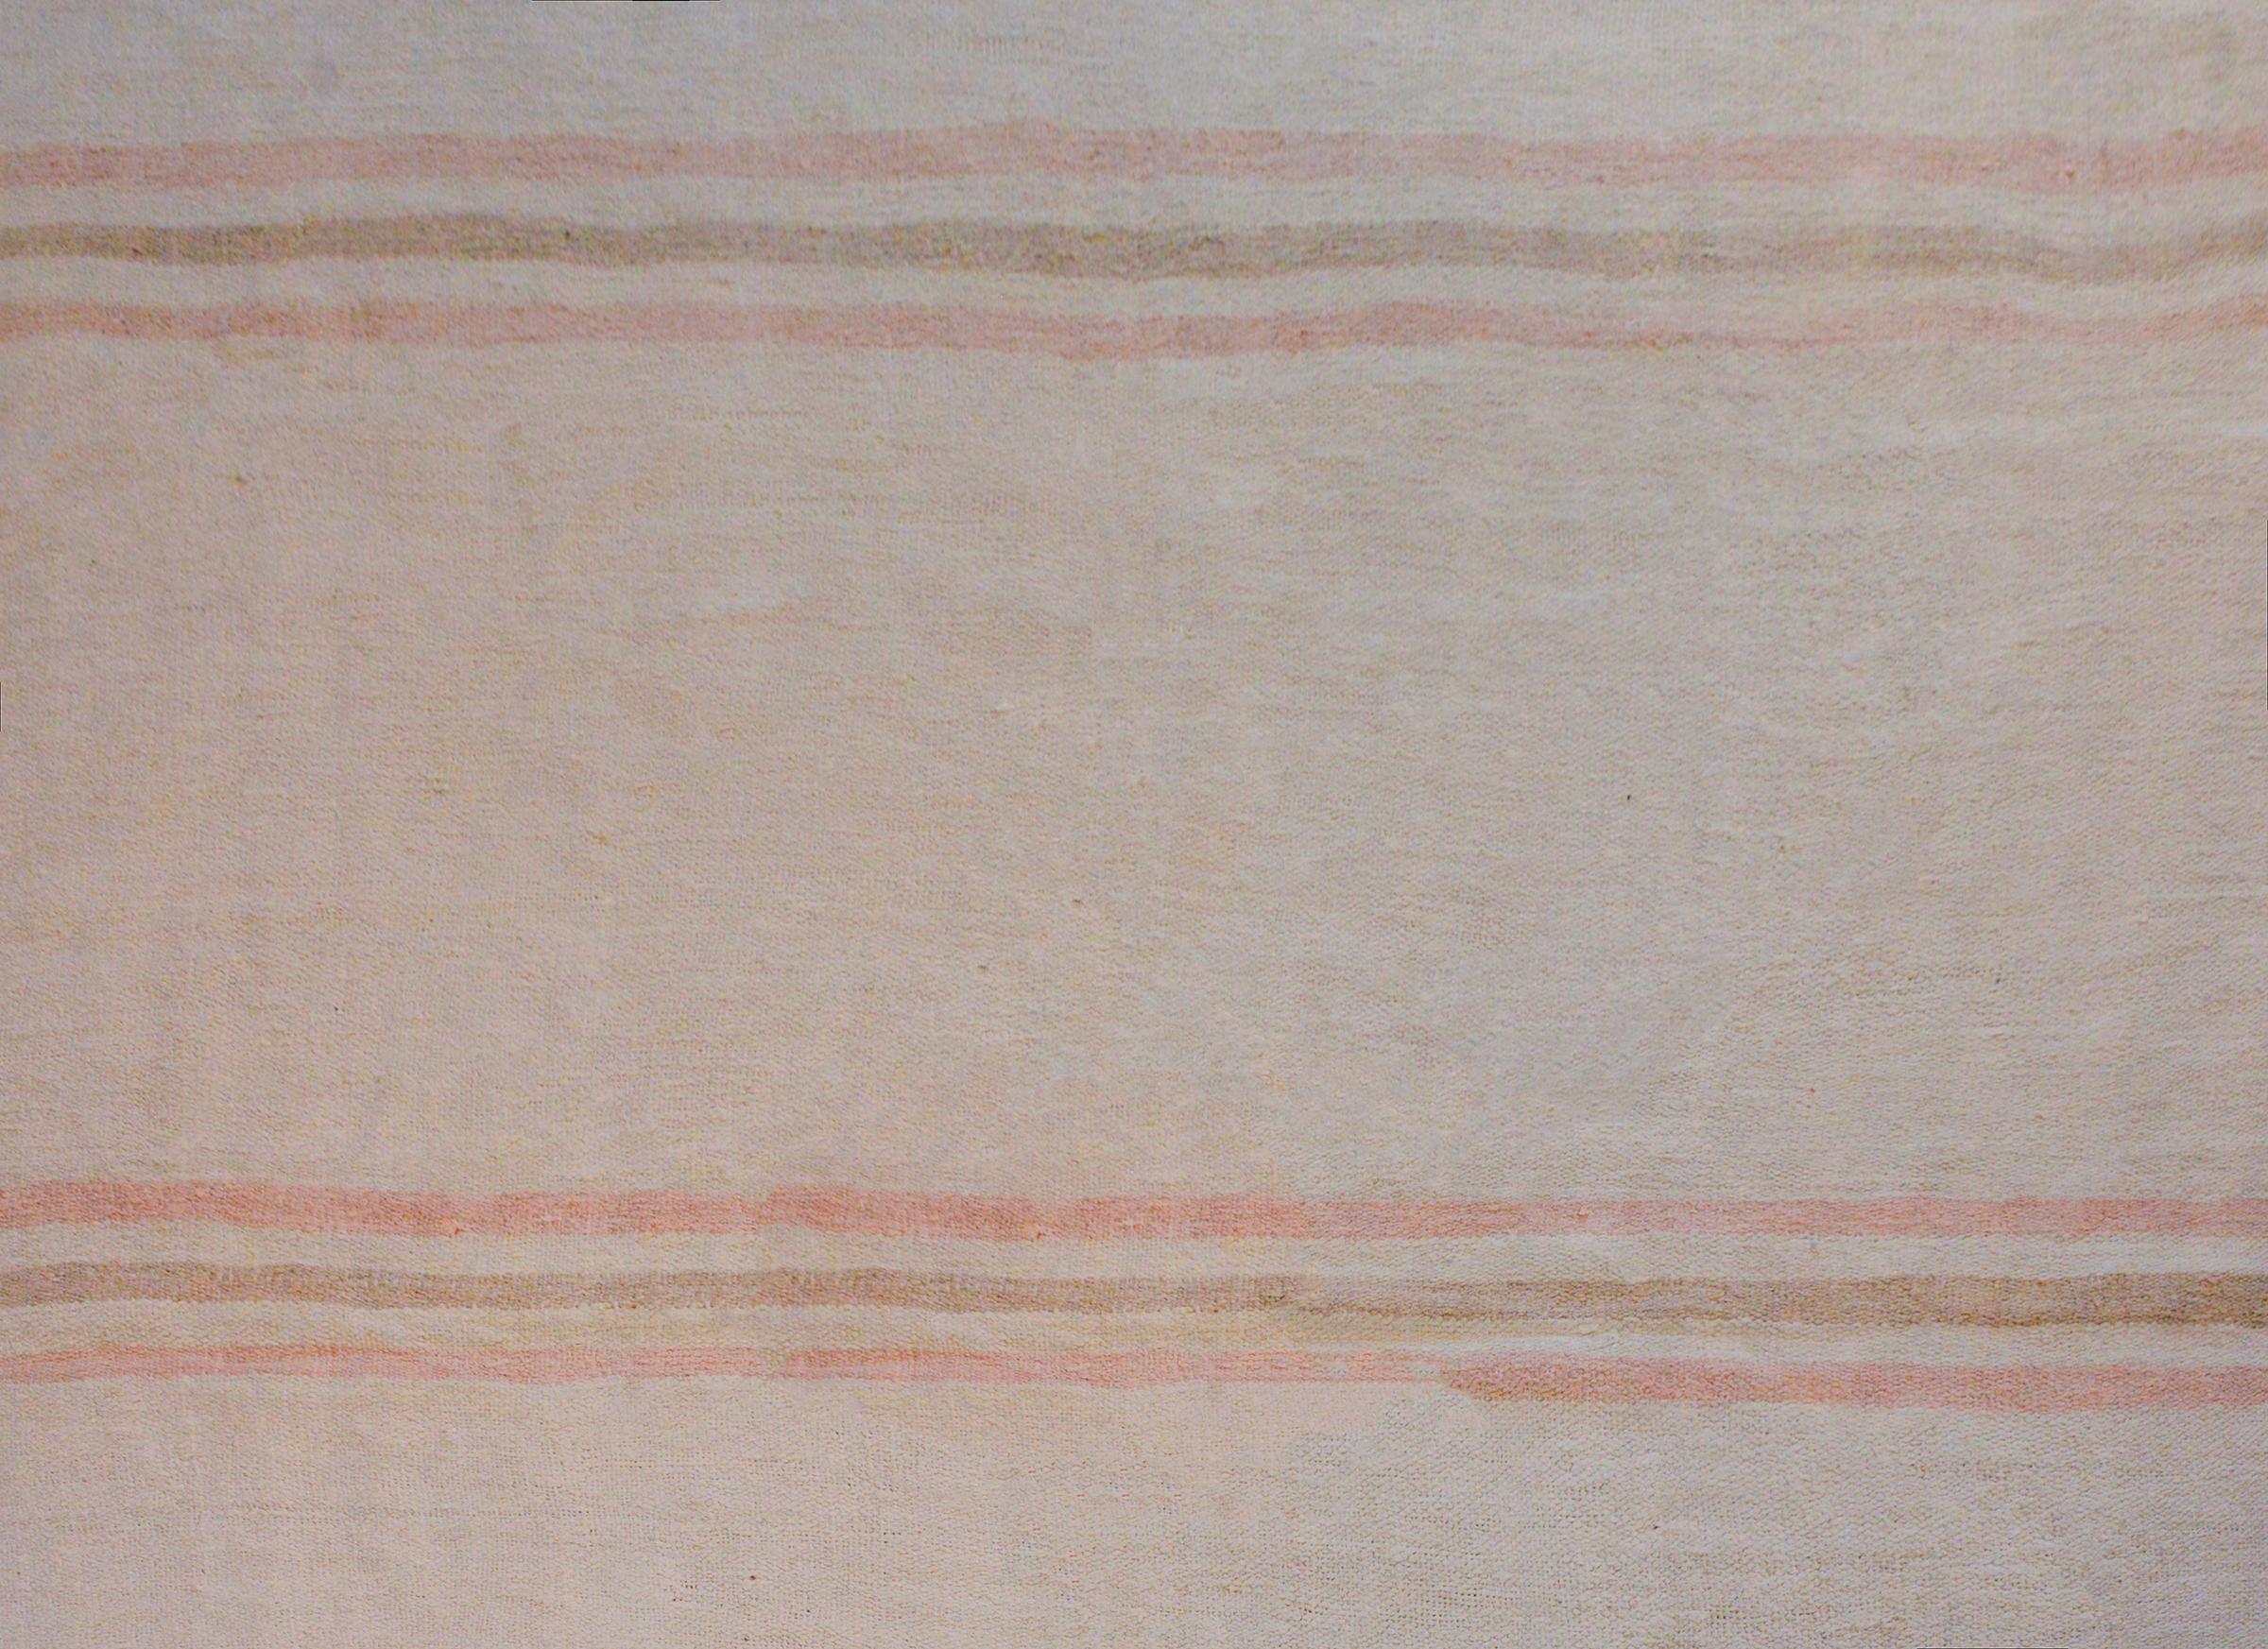 A beautiful vintage Turkish Konya Kilim rug with a simple but chic striped pattern woven in a pale pink and brown dyed cotton.